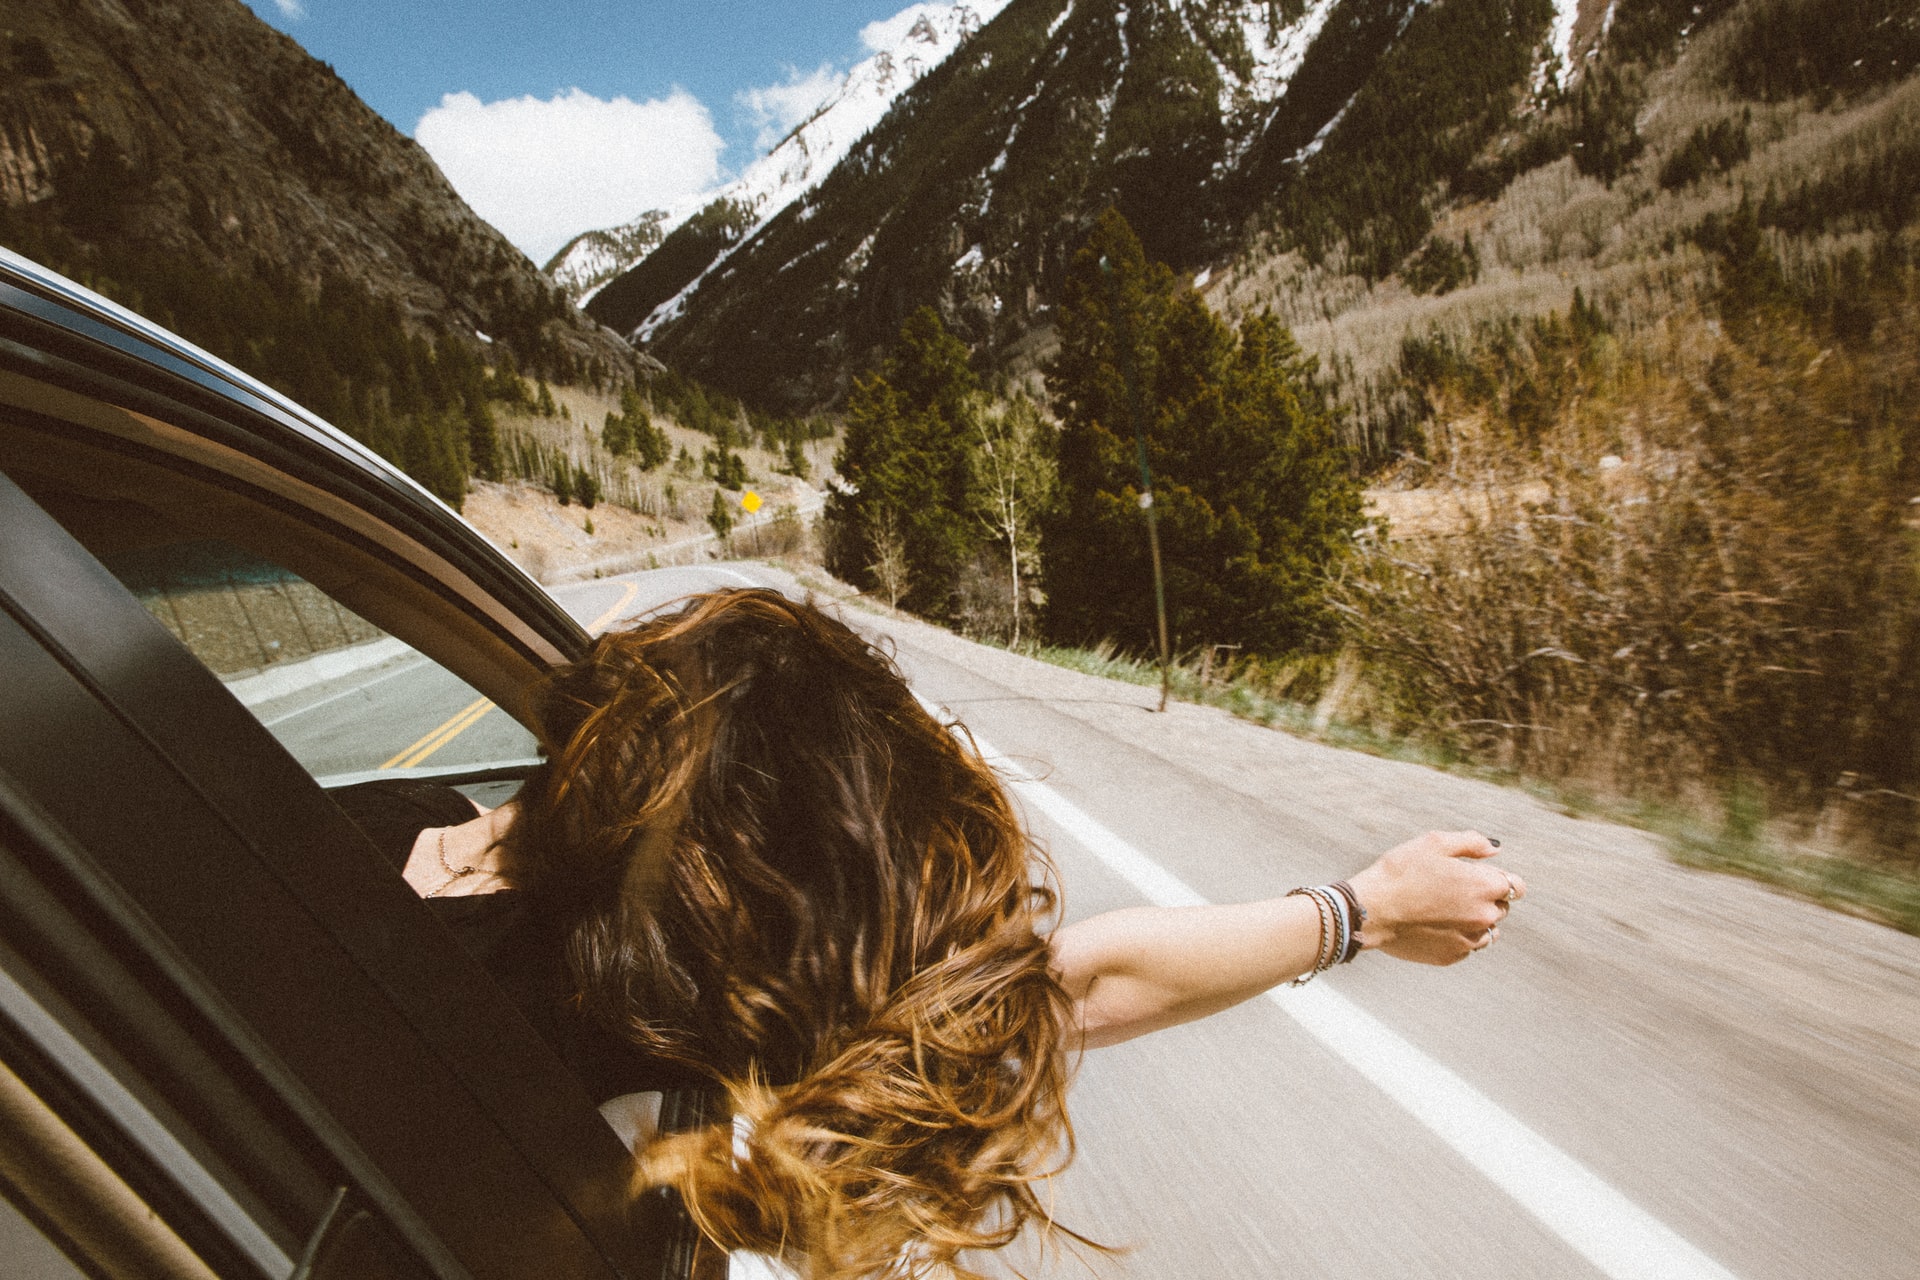 Girl sticking her head out the window on a road trip.